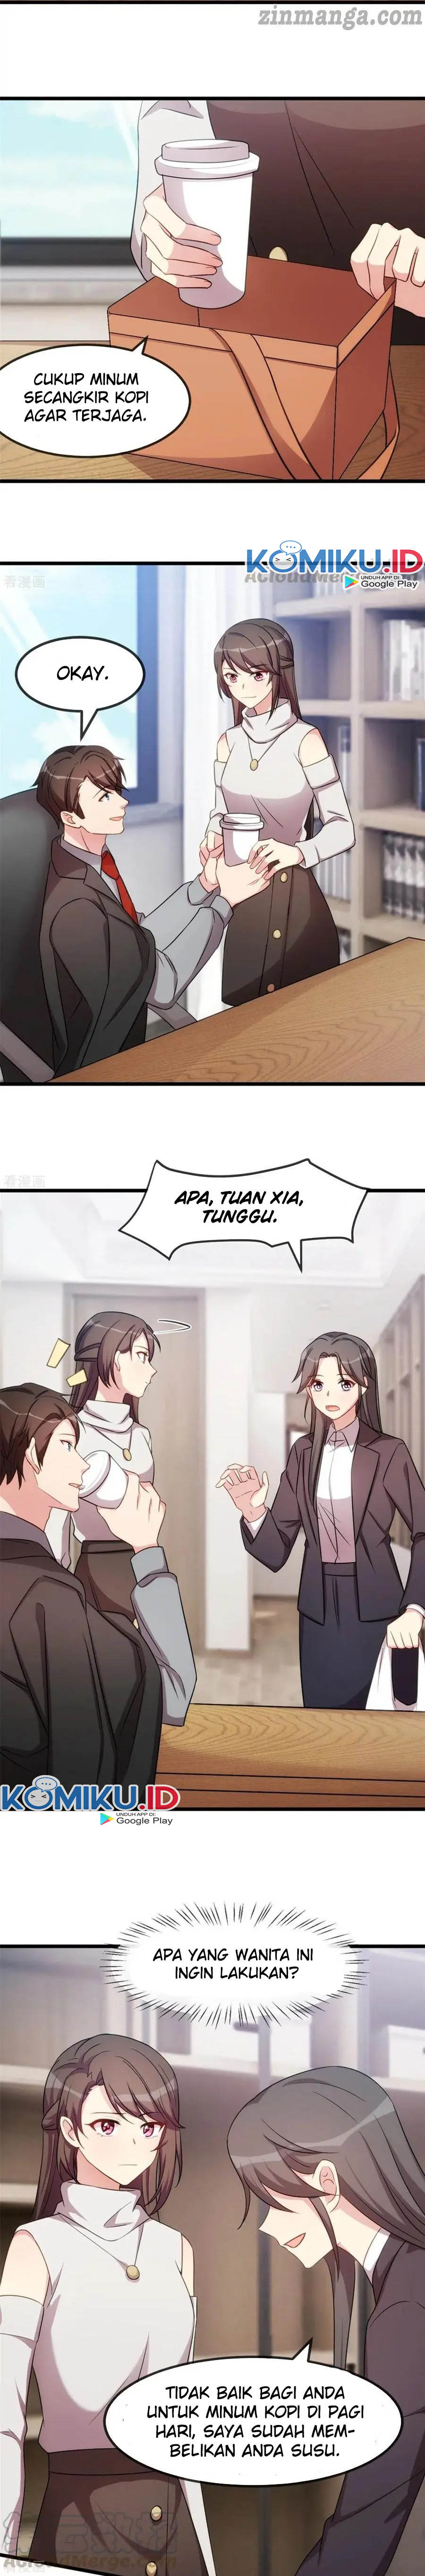 CEO’s Sudden Proposal Chapter 269 3